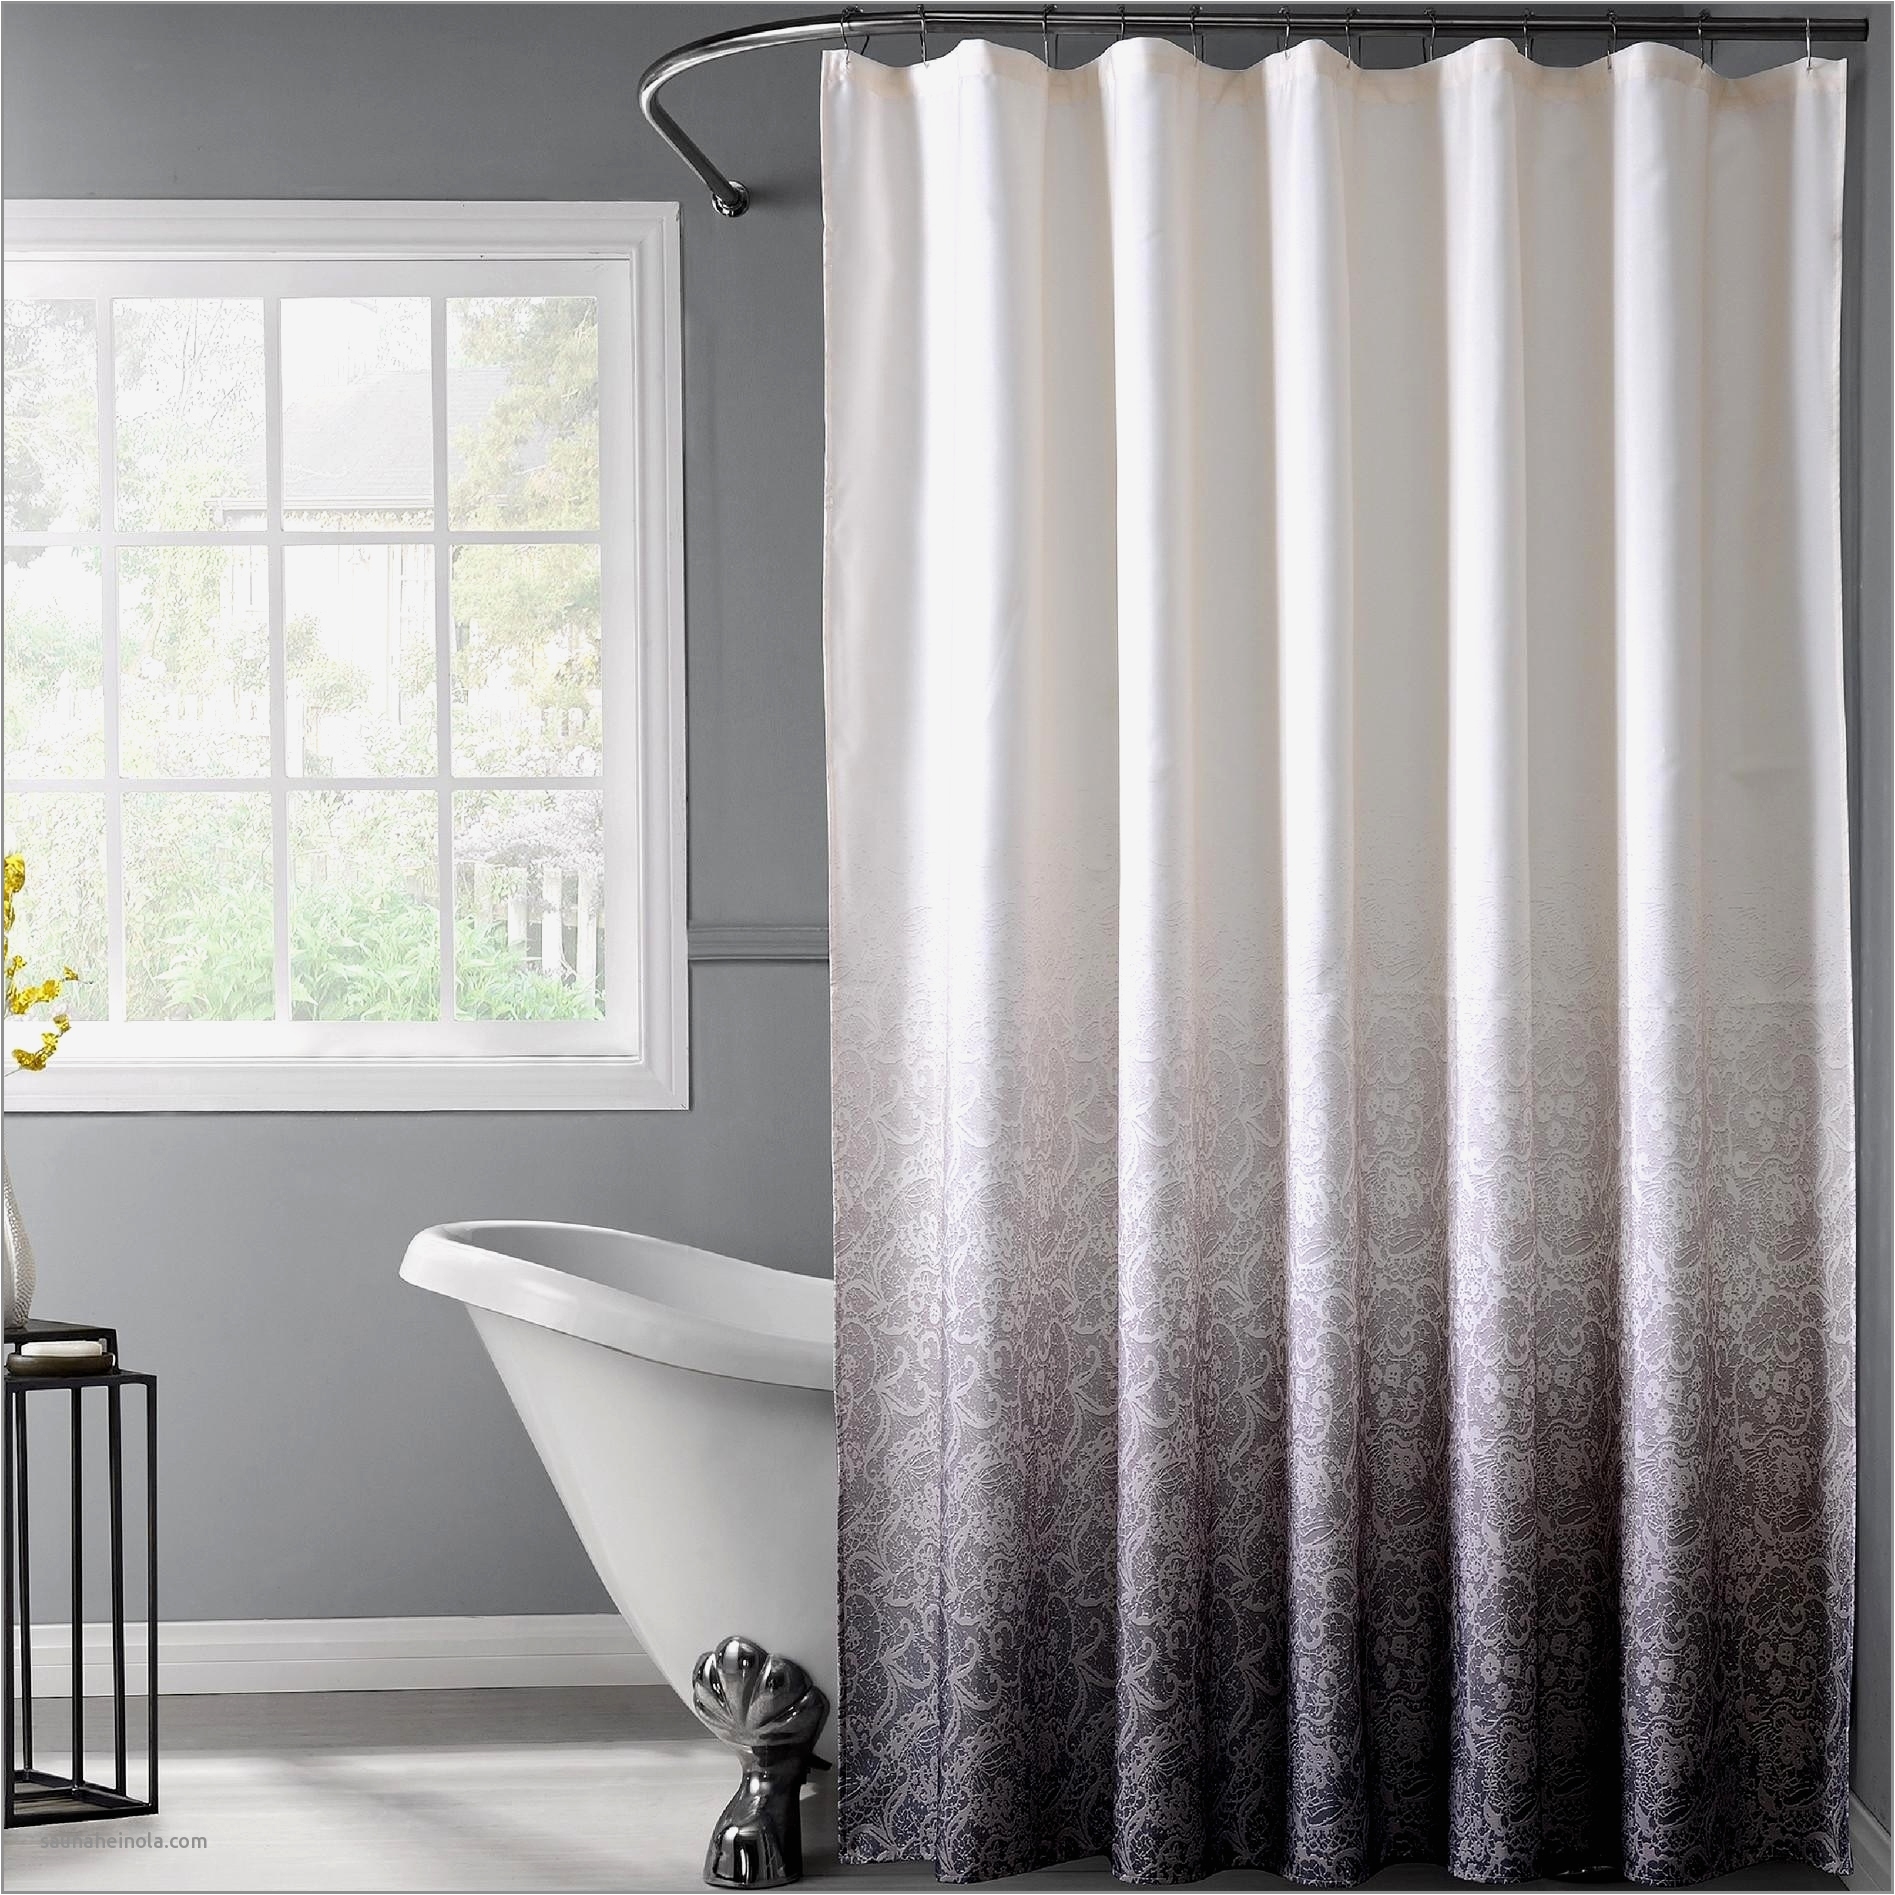 country shower curtains for the bathroom awesome furniture high end shower curtains elegant dillards curtains 0d